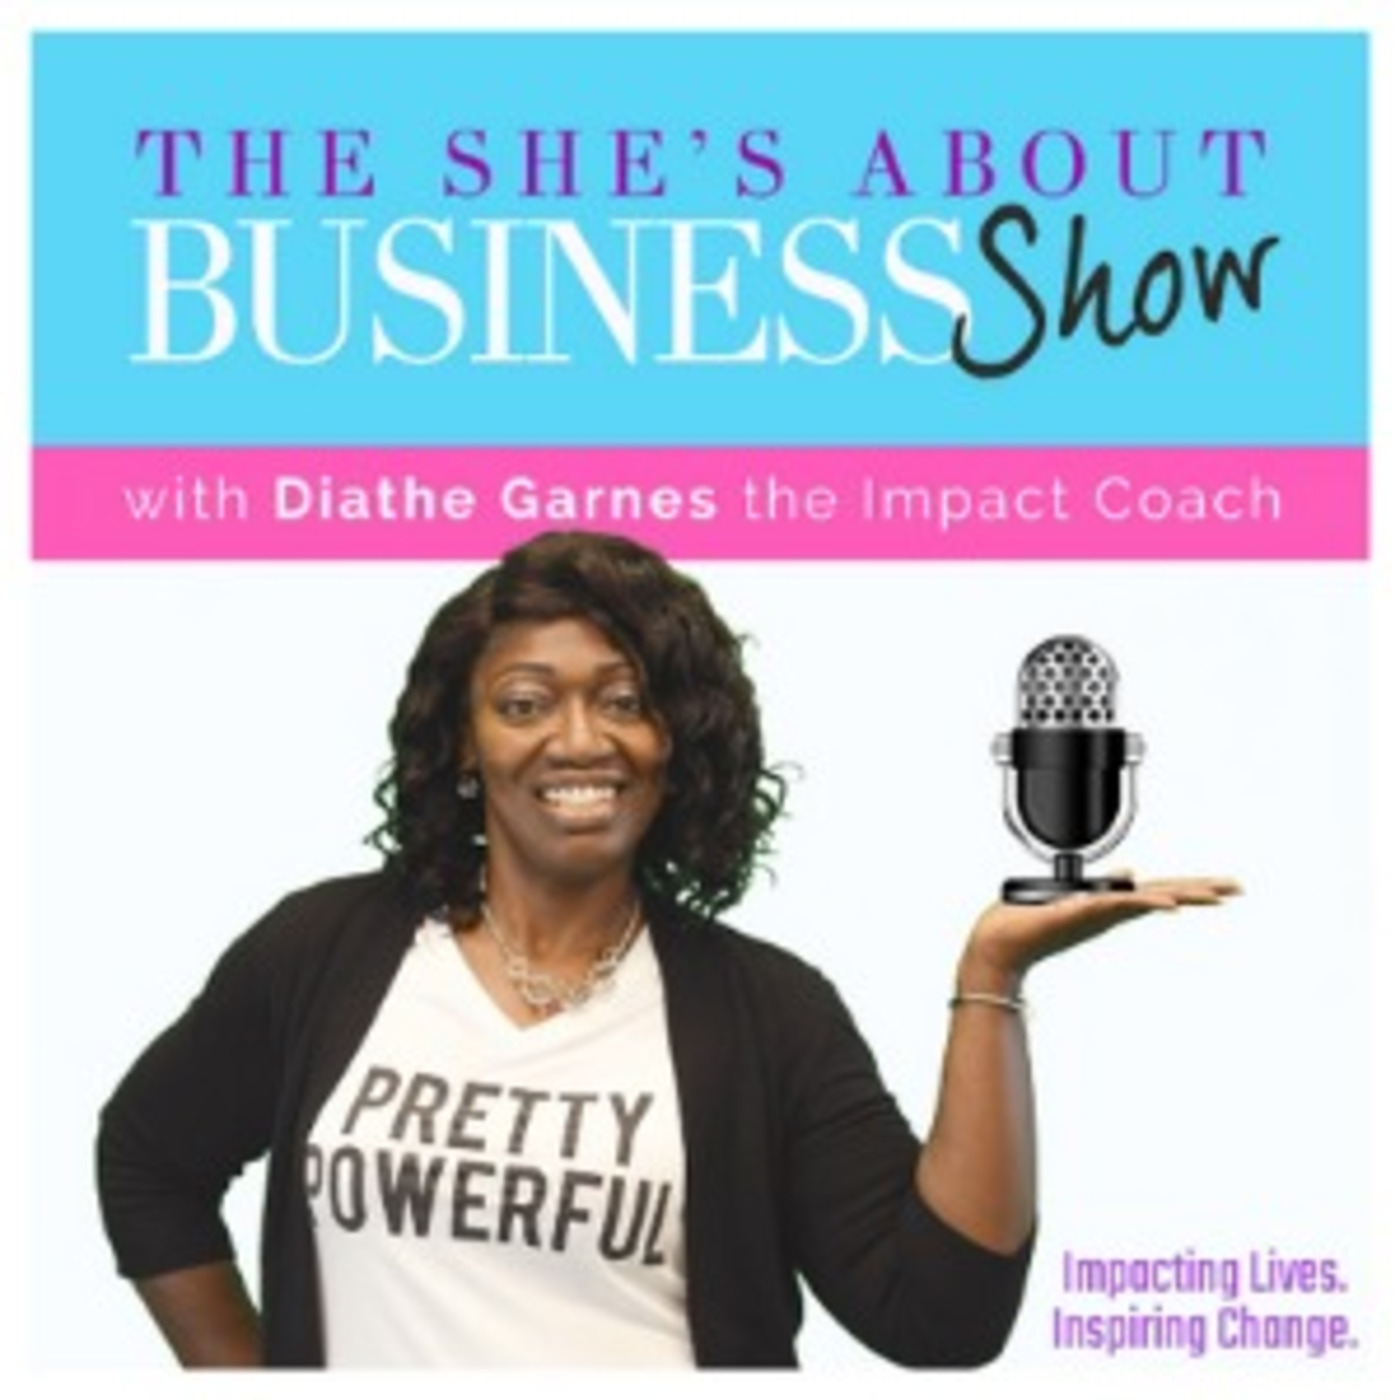 Episode 20: Why It’s so Important for Women to Support Each Other